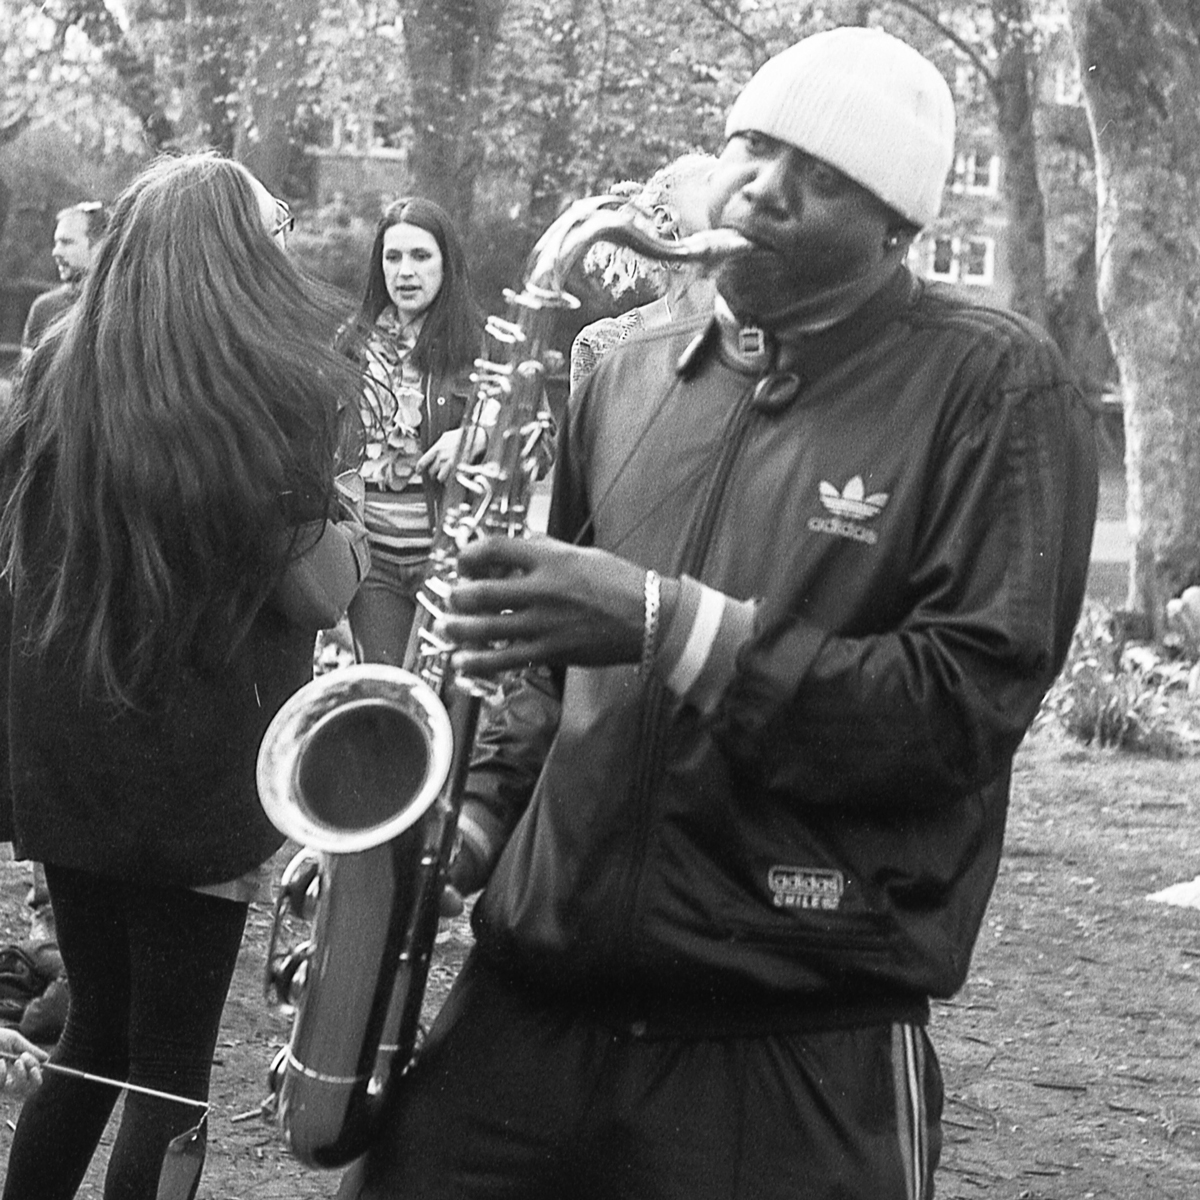 Man of colour playing the saxophone